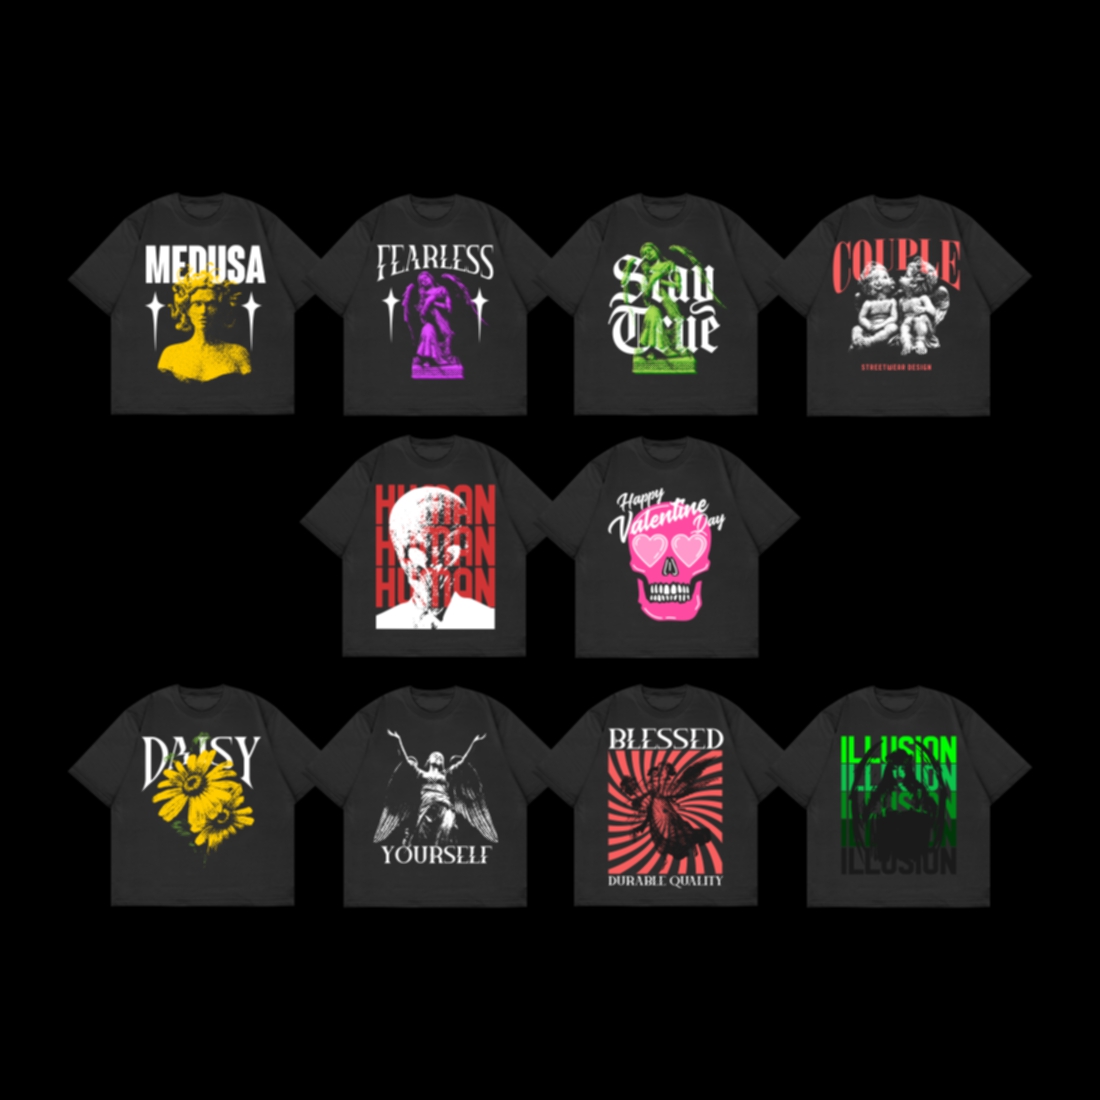 streetwear t-shirt designs bundle vector, urban street style graphic tees preview image.